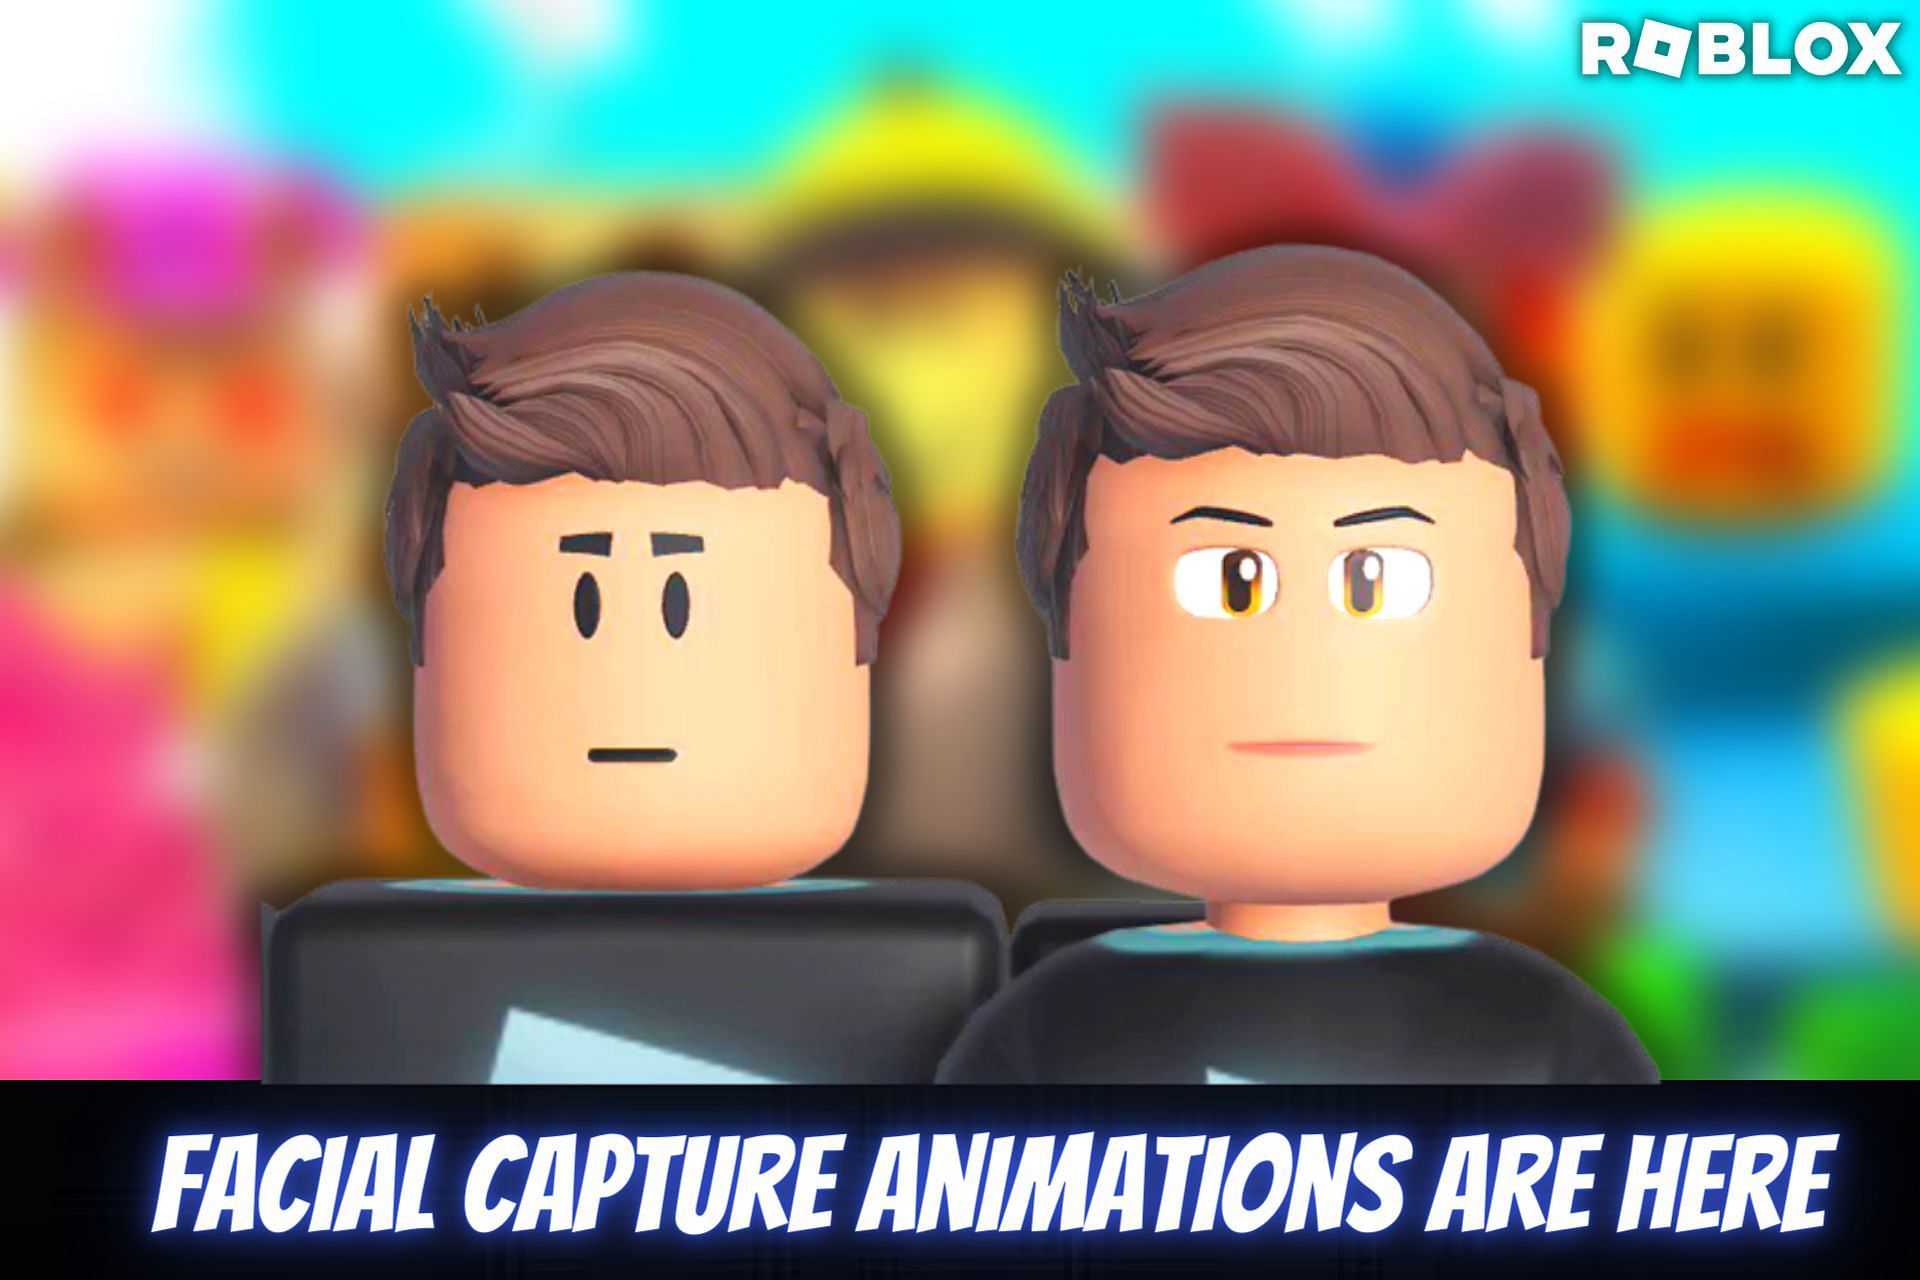 Roblox adds a familiar face-tracking animation feature, and players are  already being weird with it